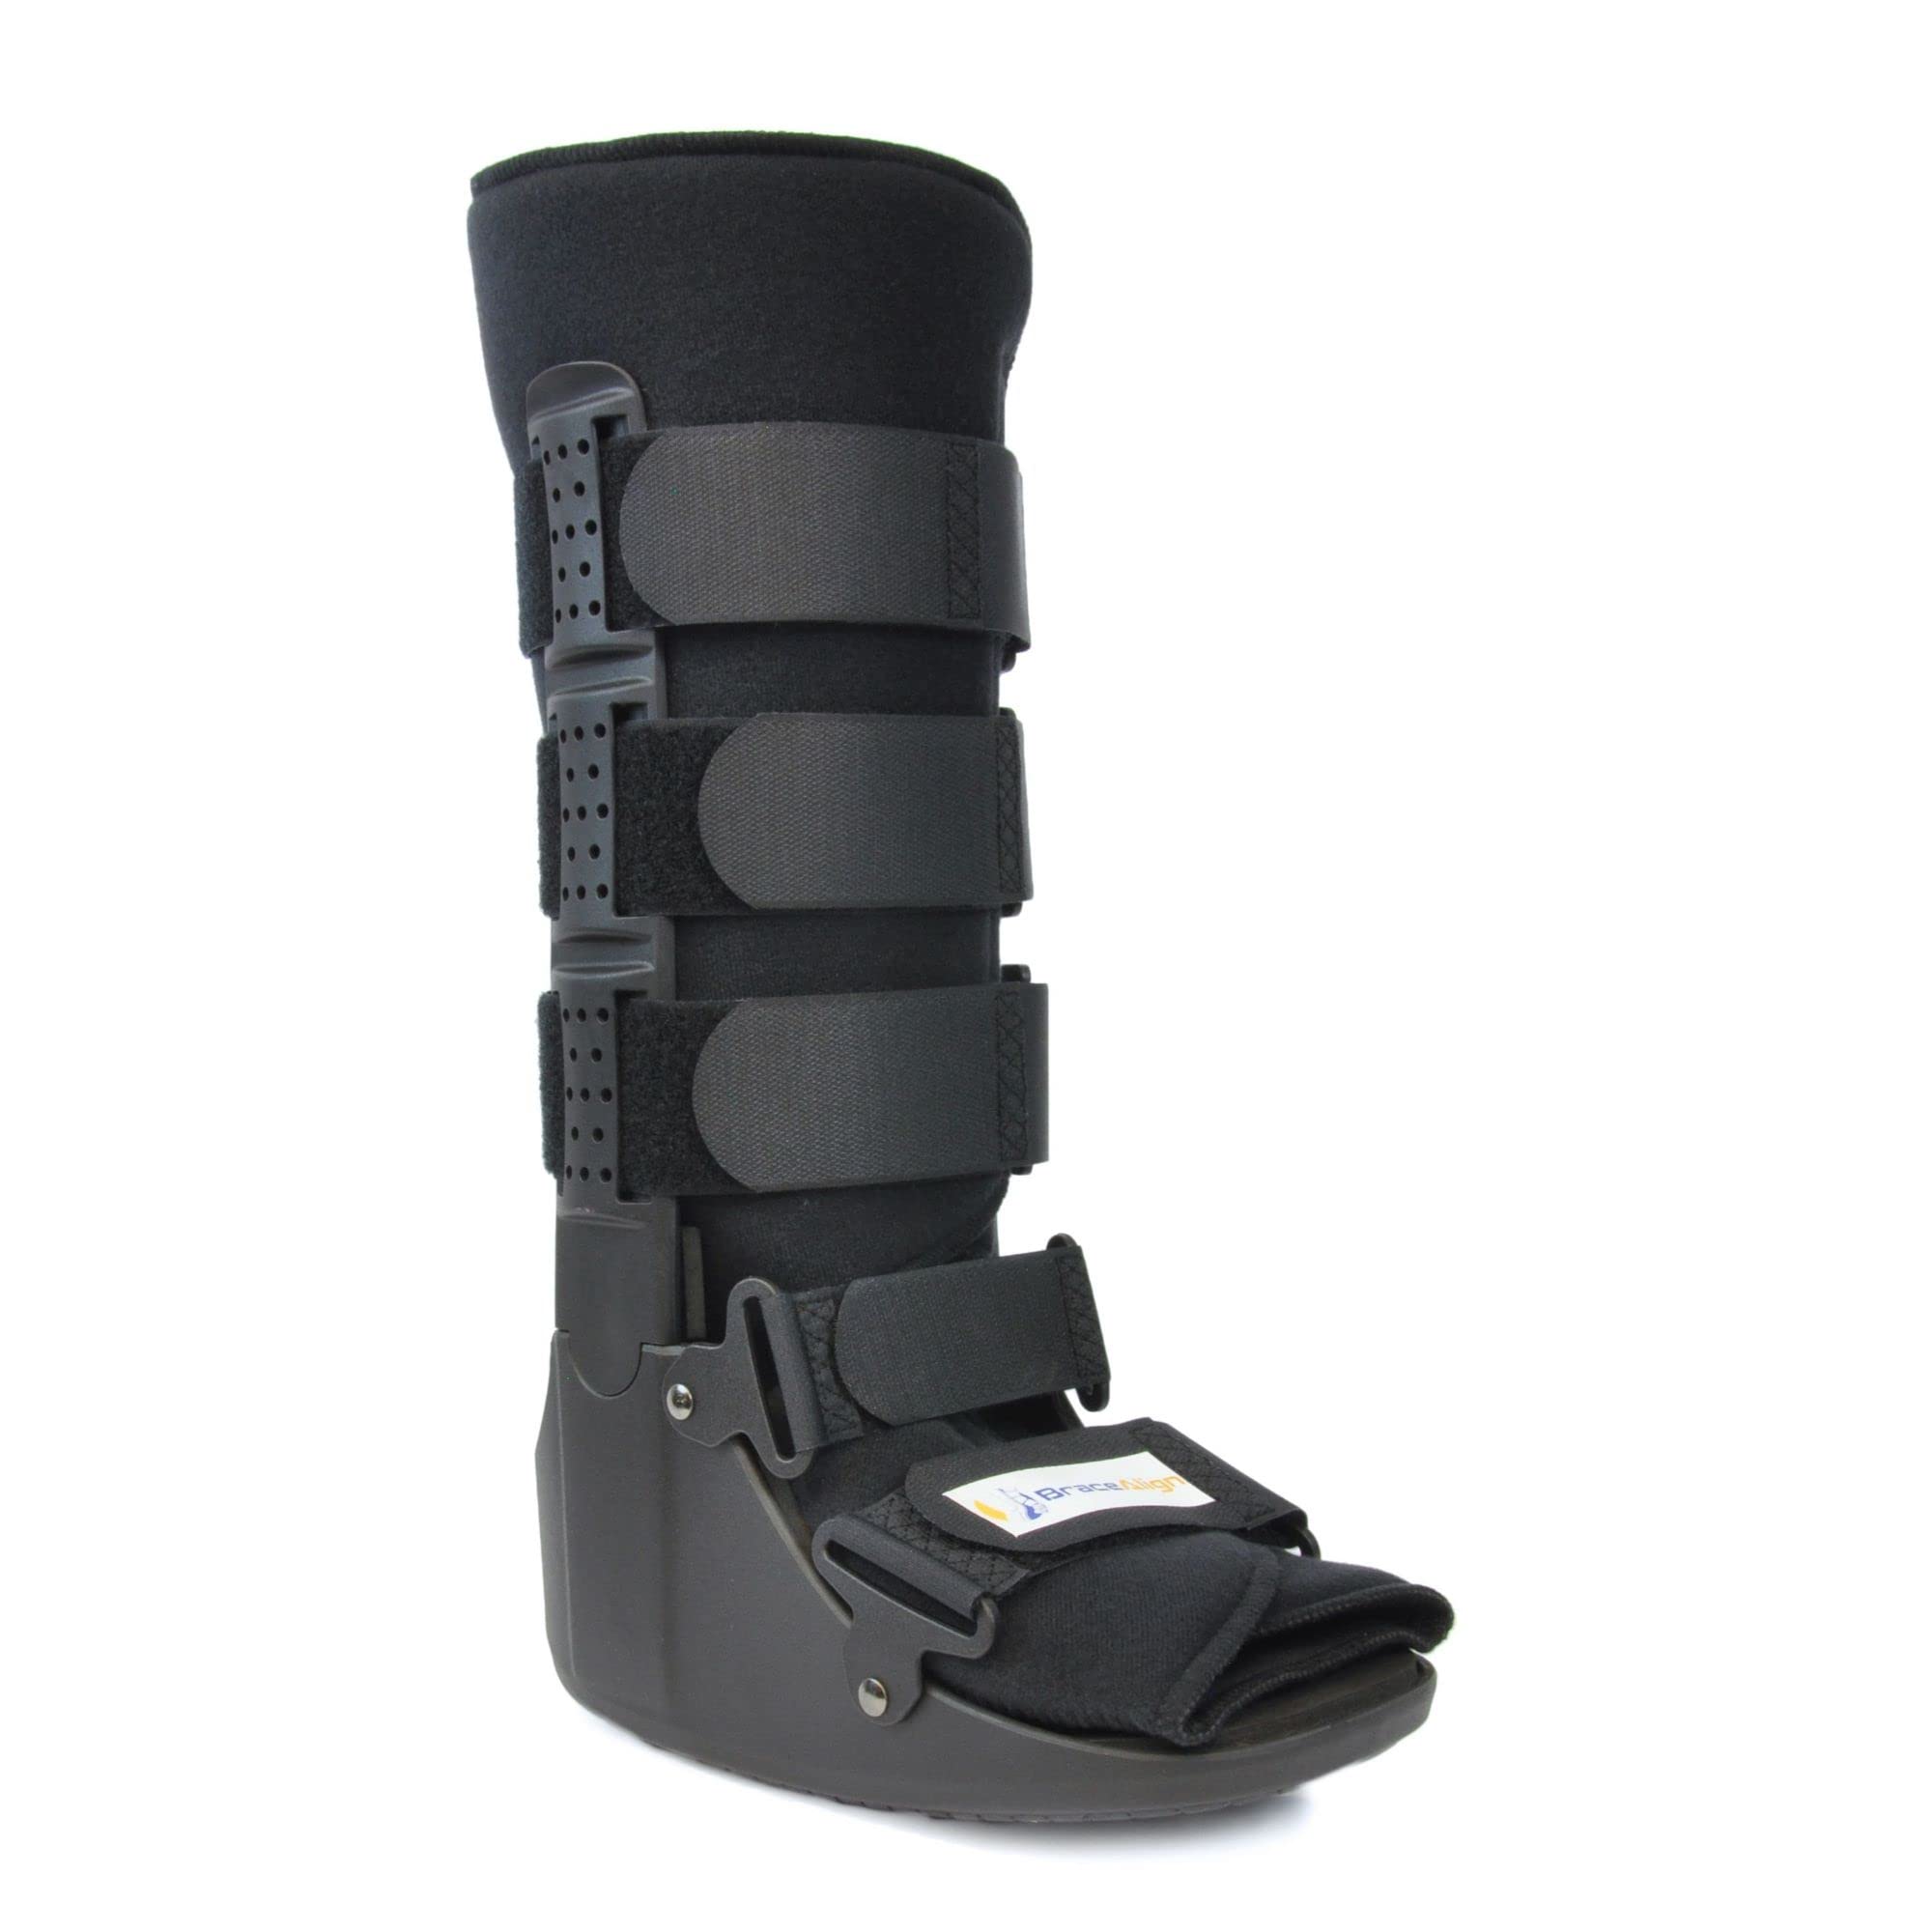 Cam Walker Fracture PDAC Approved L4386 and L4387 Boot Tall - Medical Recovery, Protection and Healing Boot - Toe, Foot or Ankle Injuries by Brace ...